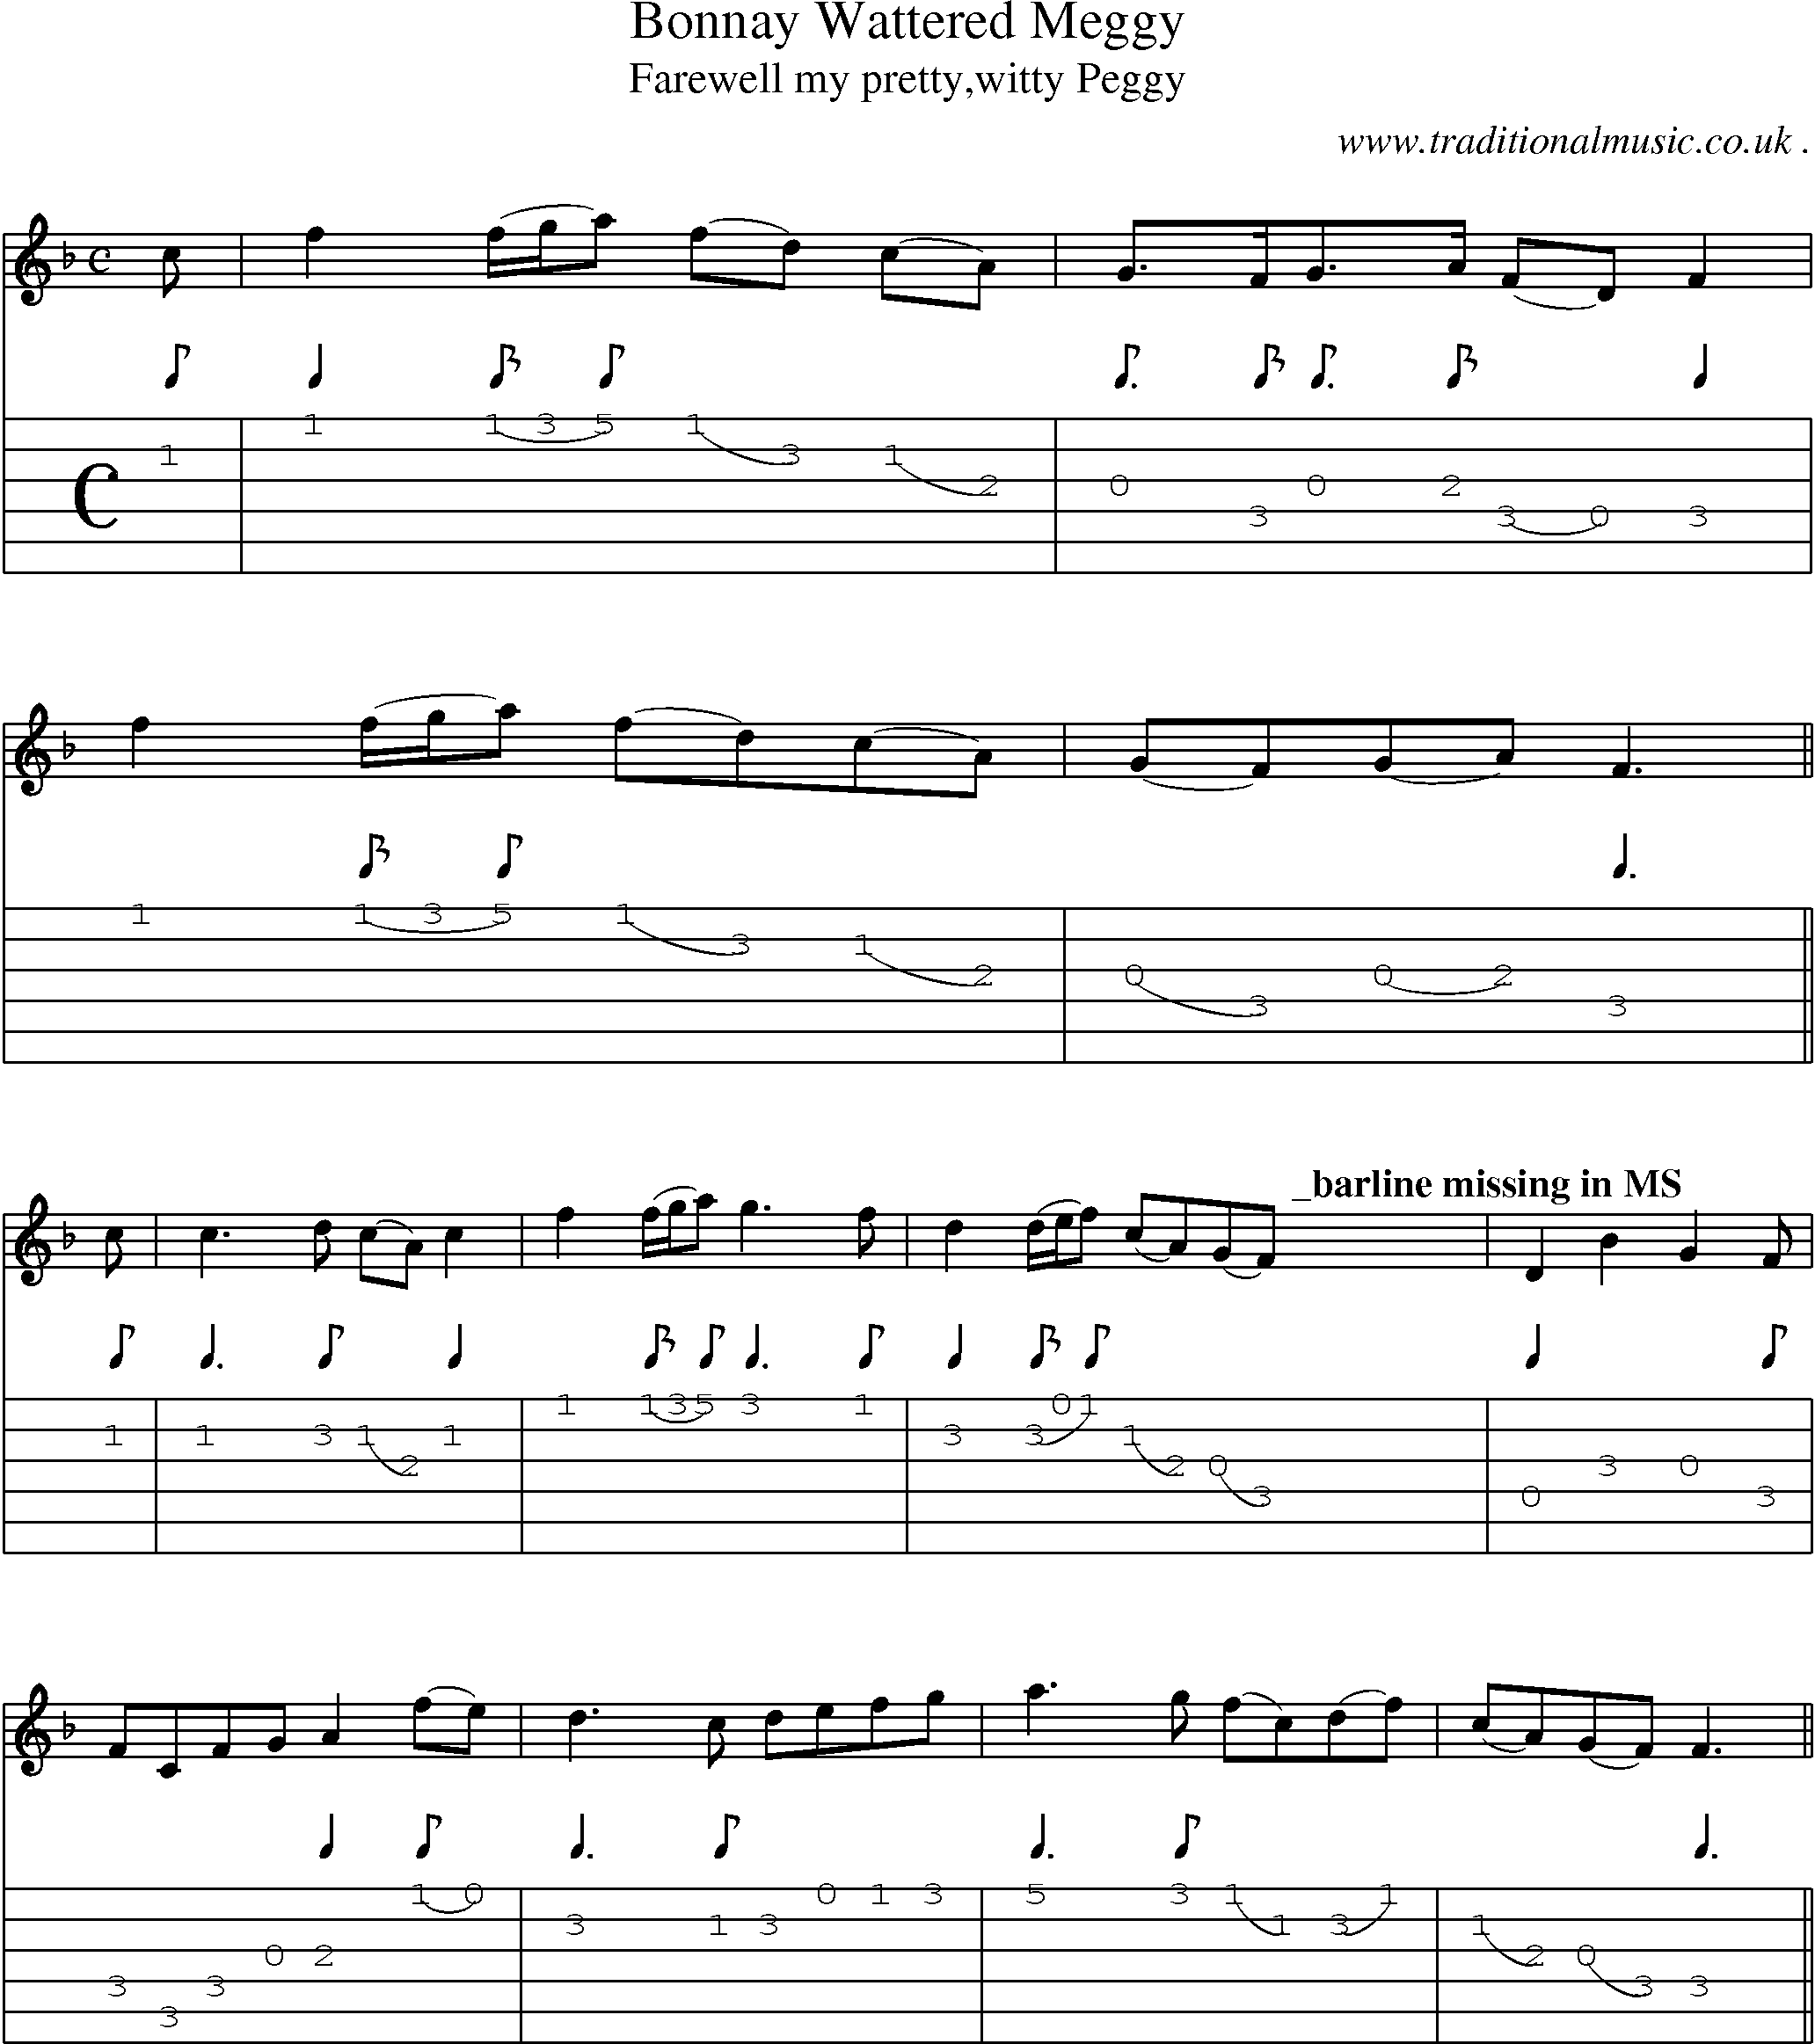 Sheet-Music and Guitar Tabs for Bonnay Wattered Meggy